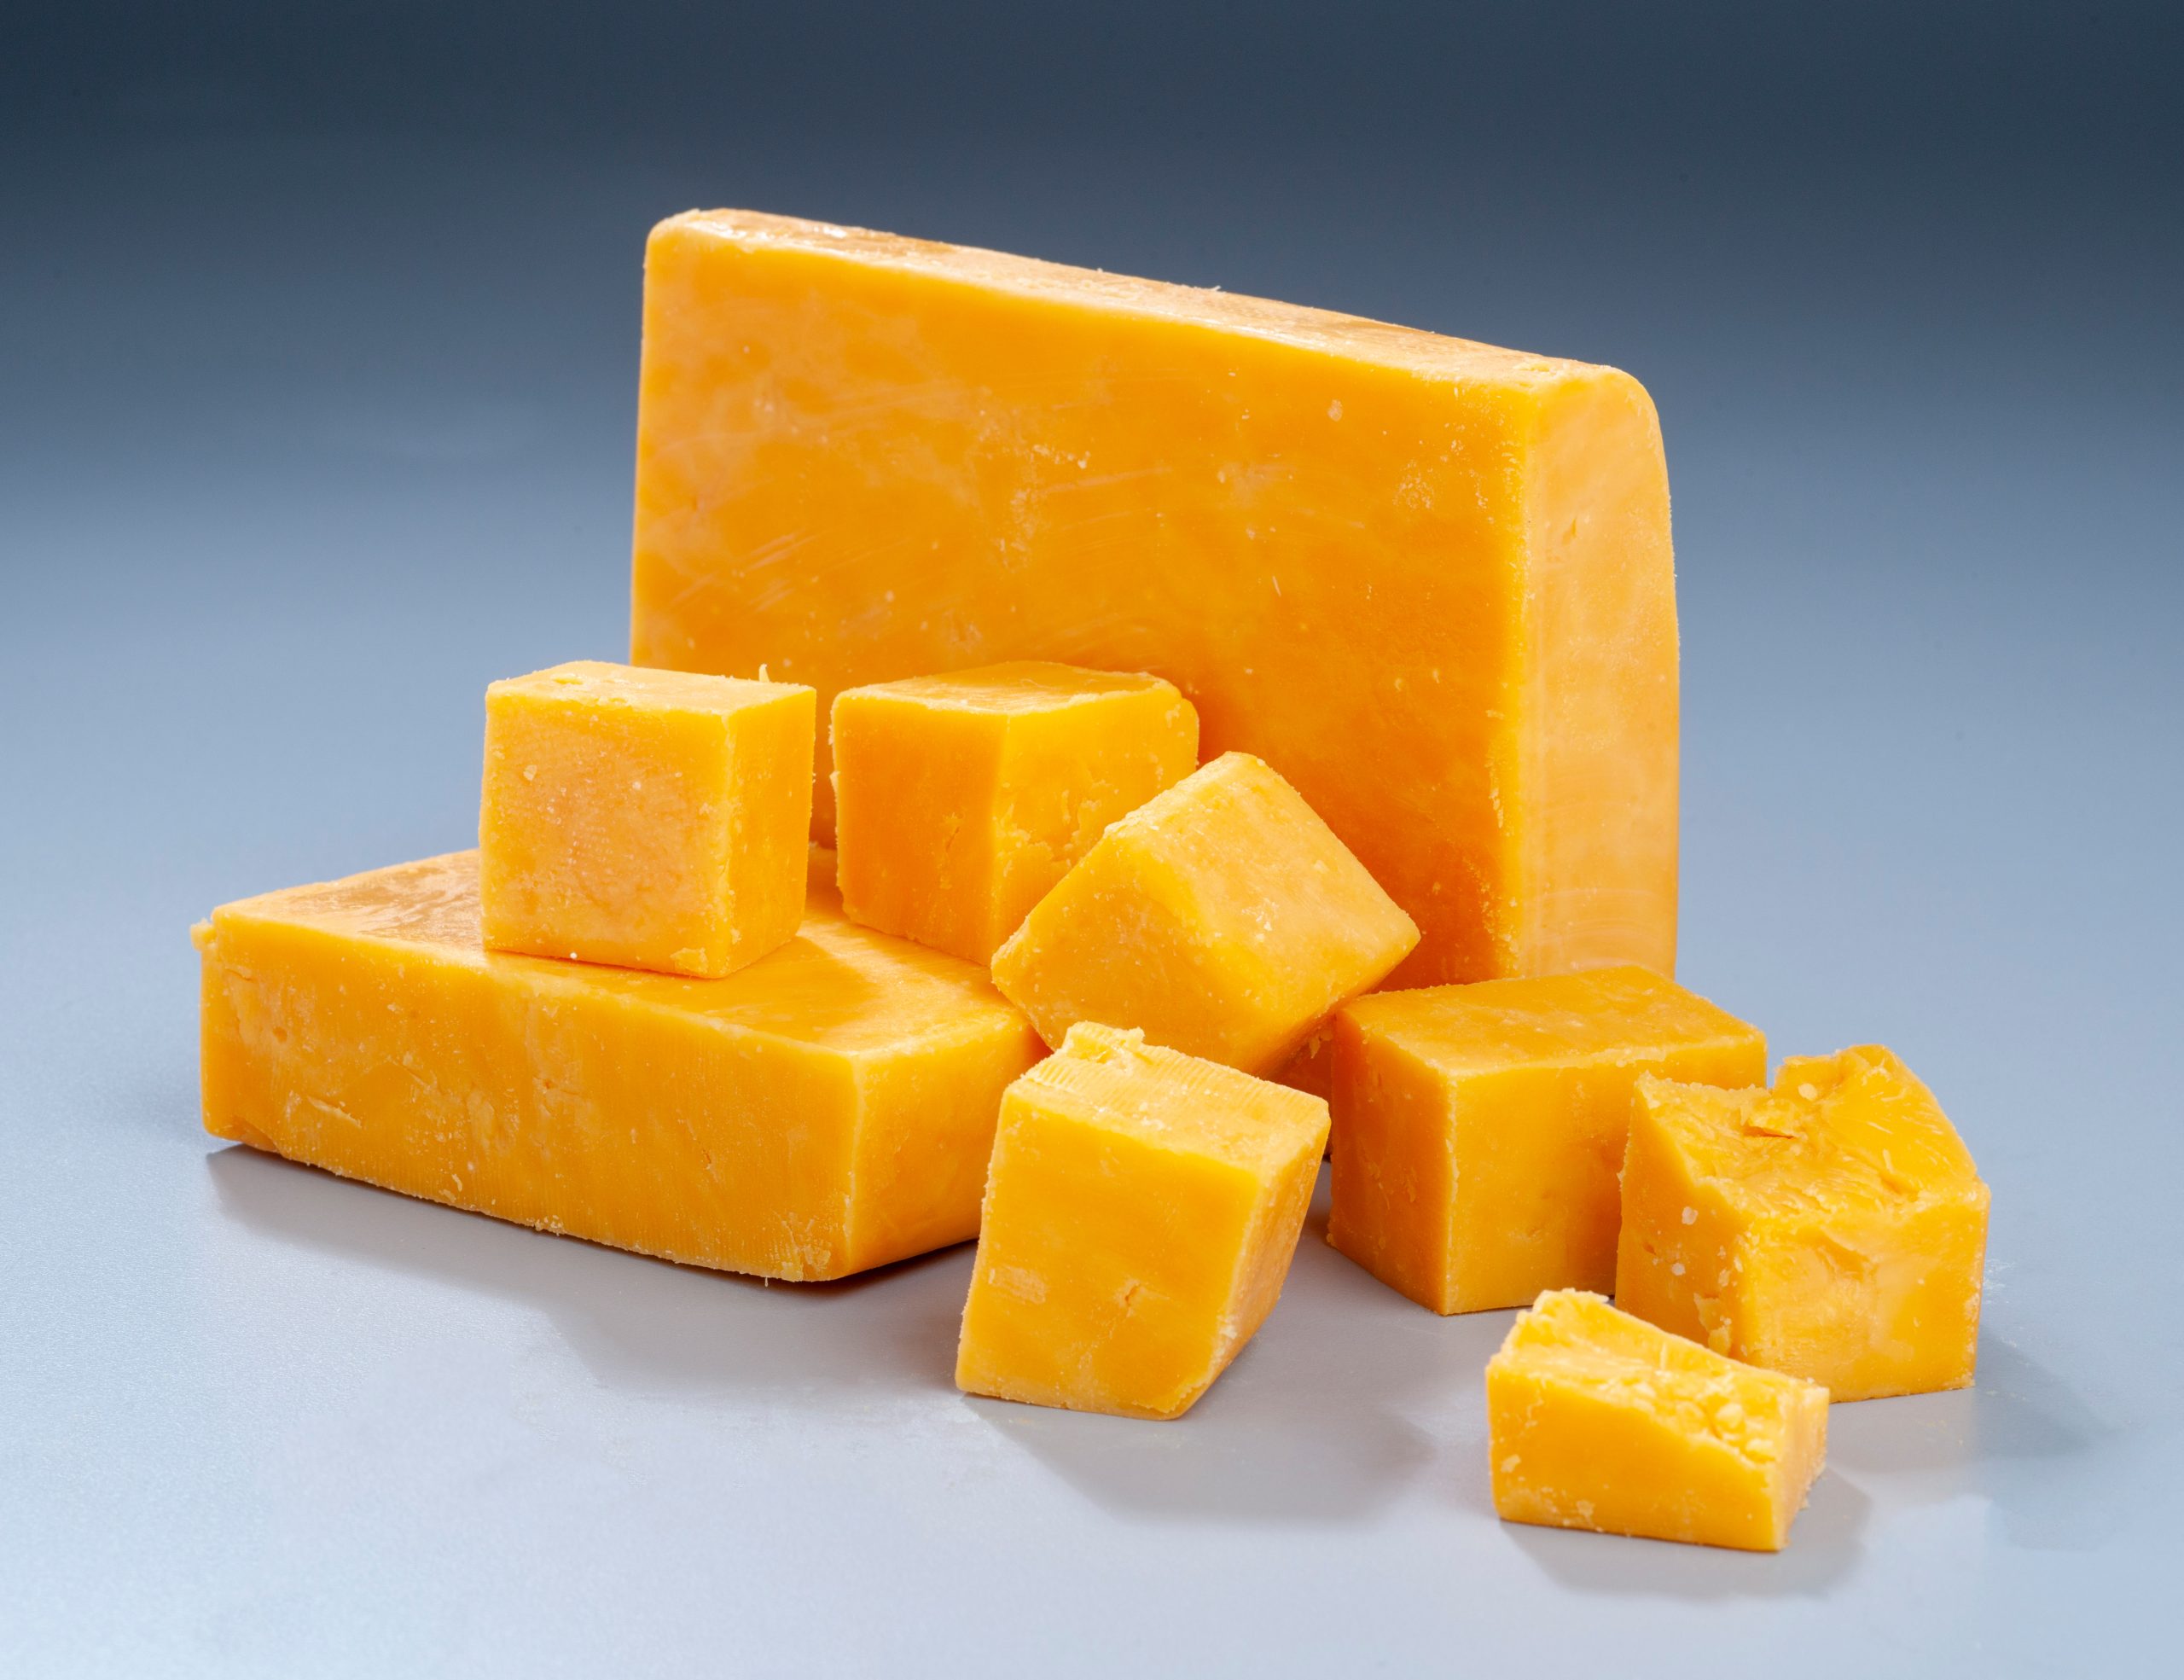 Red,Cheddar,Block,And,Cubes,On,Gradient,Background